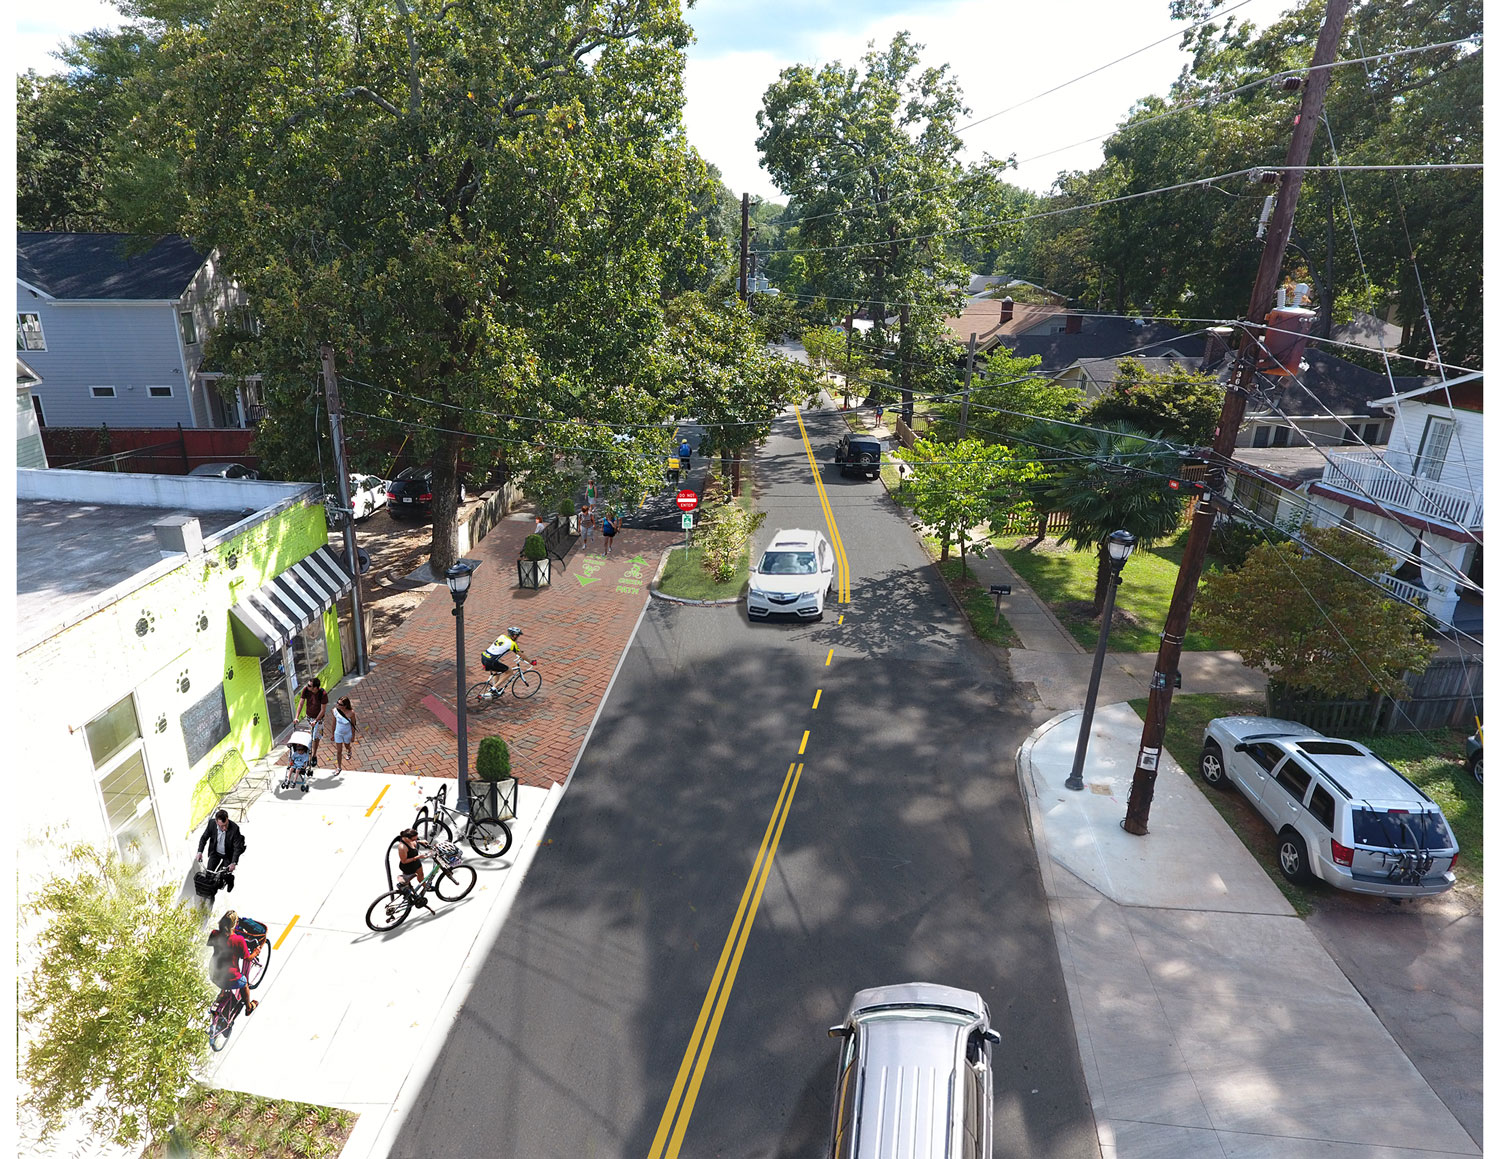  Proposed modification of northern bound lane for bicycle-pedestrian greenway signing and markings, landscape bulb-outs to restrict entrances to only local traffic and on-street parking. 